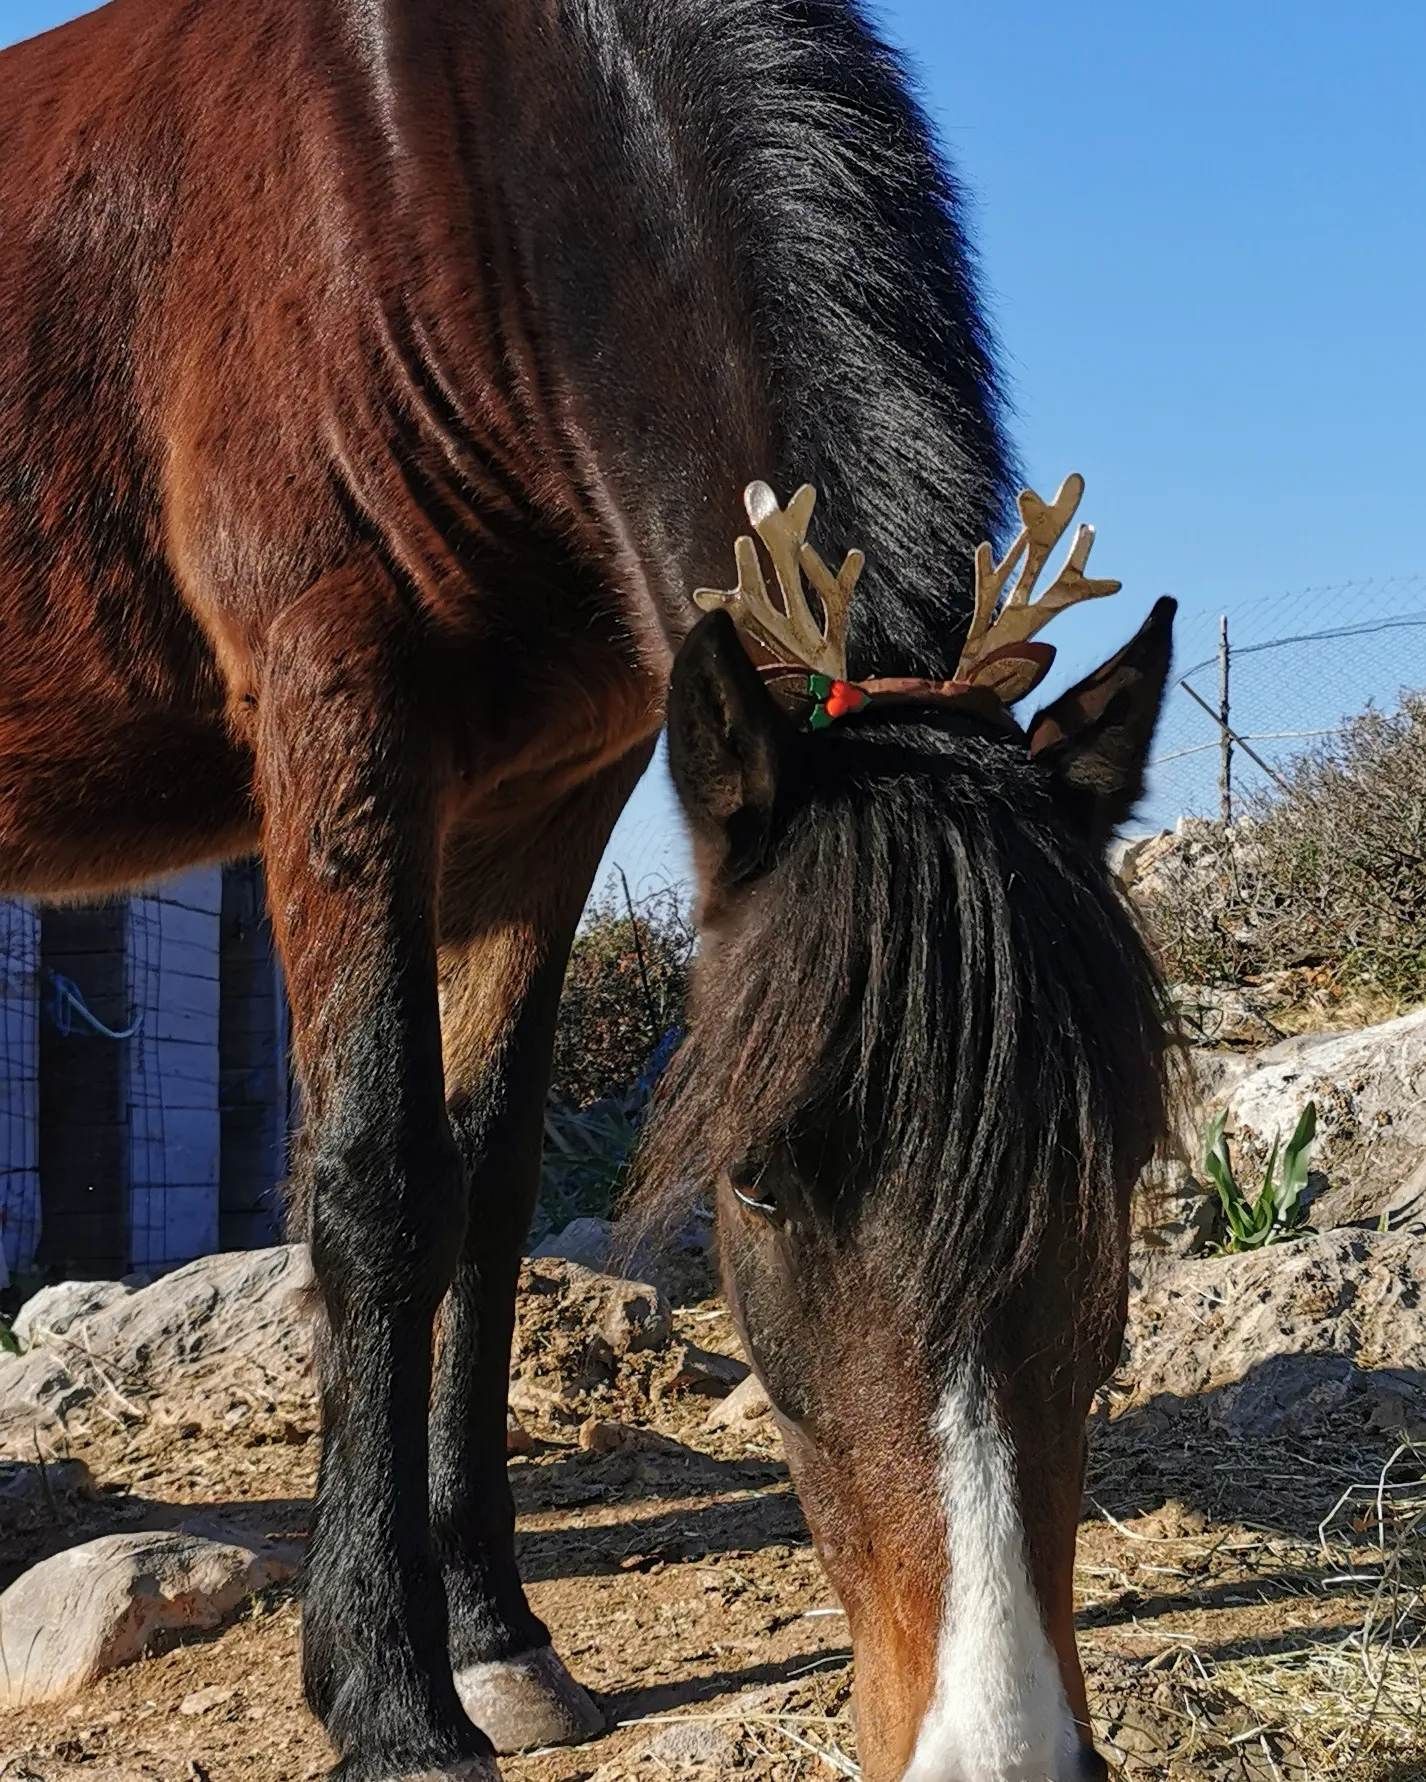 Aphrodite and Aris two of the trekking horses you will meet with Harriet's Hydra Horses on Hydra Island Greece.